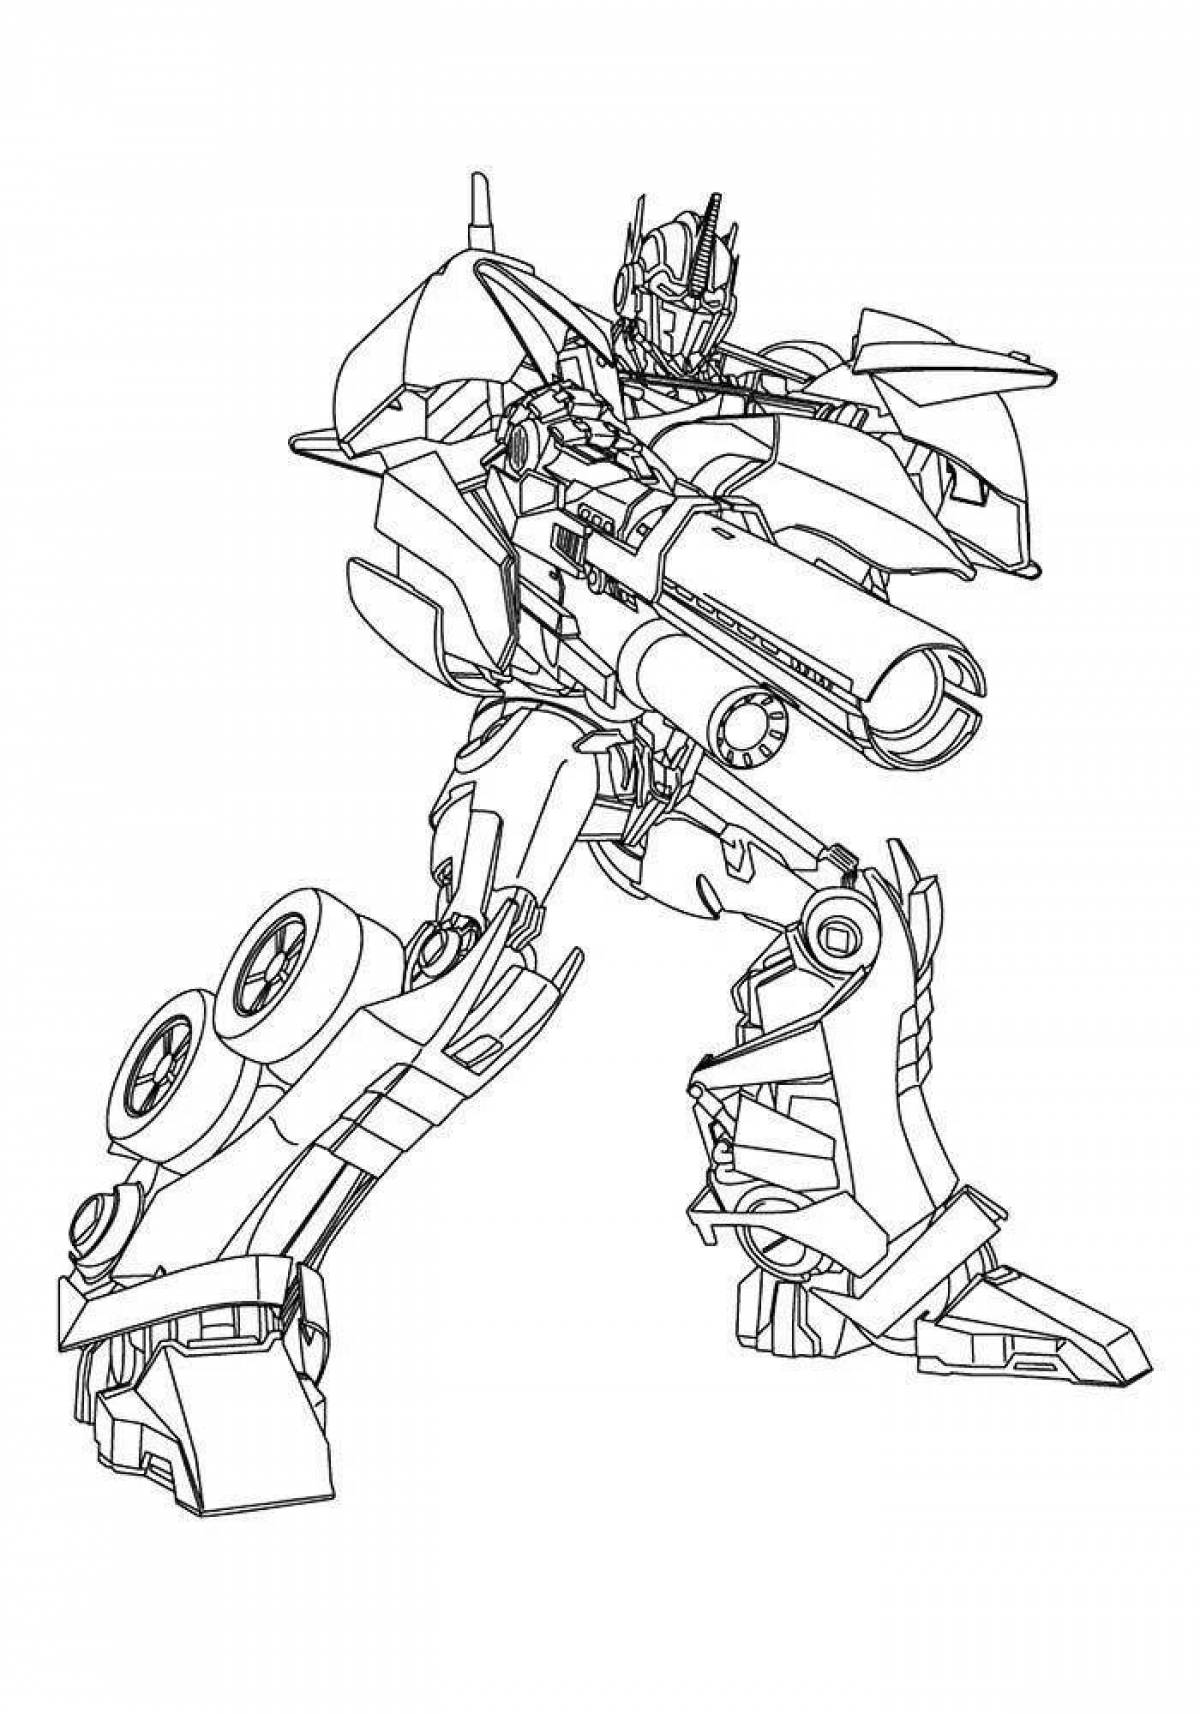 Glorious transformers prime coloring page